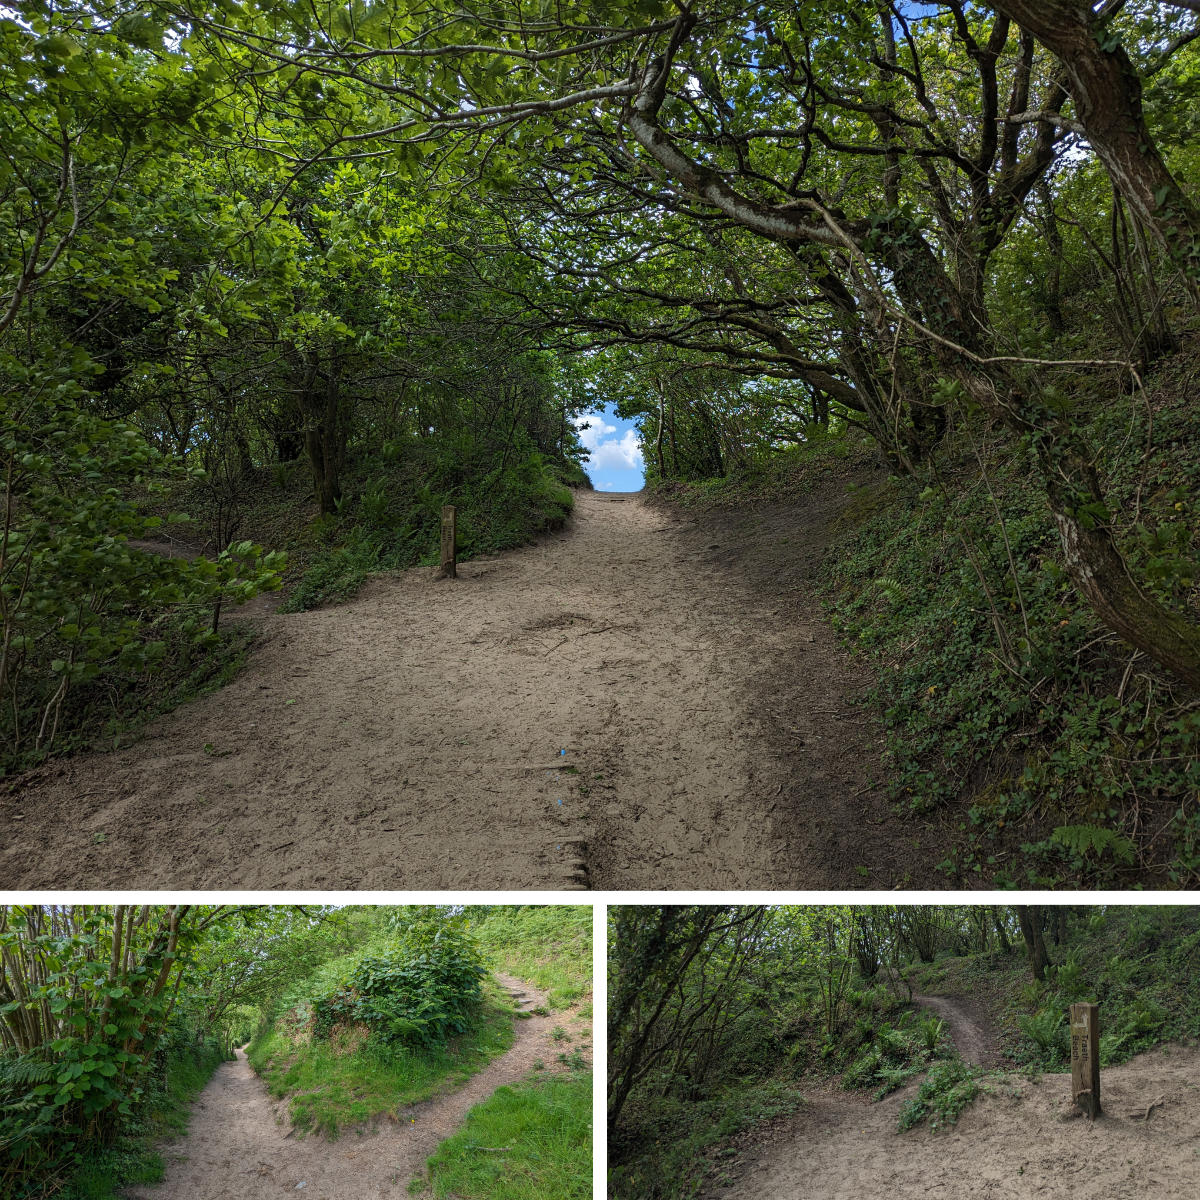 Exploring the paths above the beaches